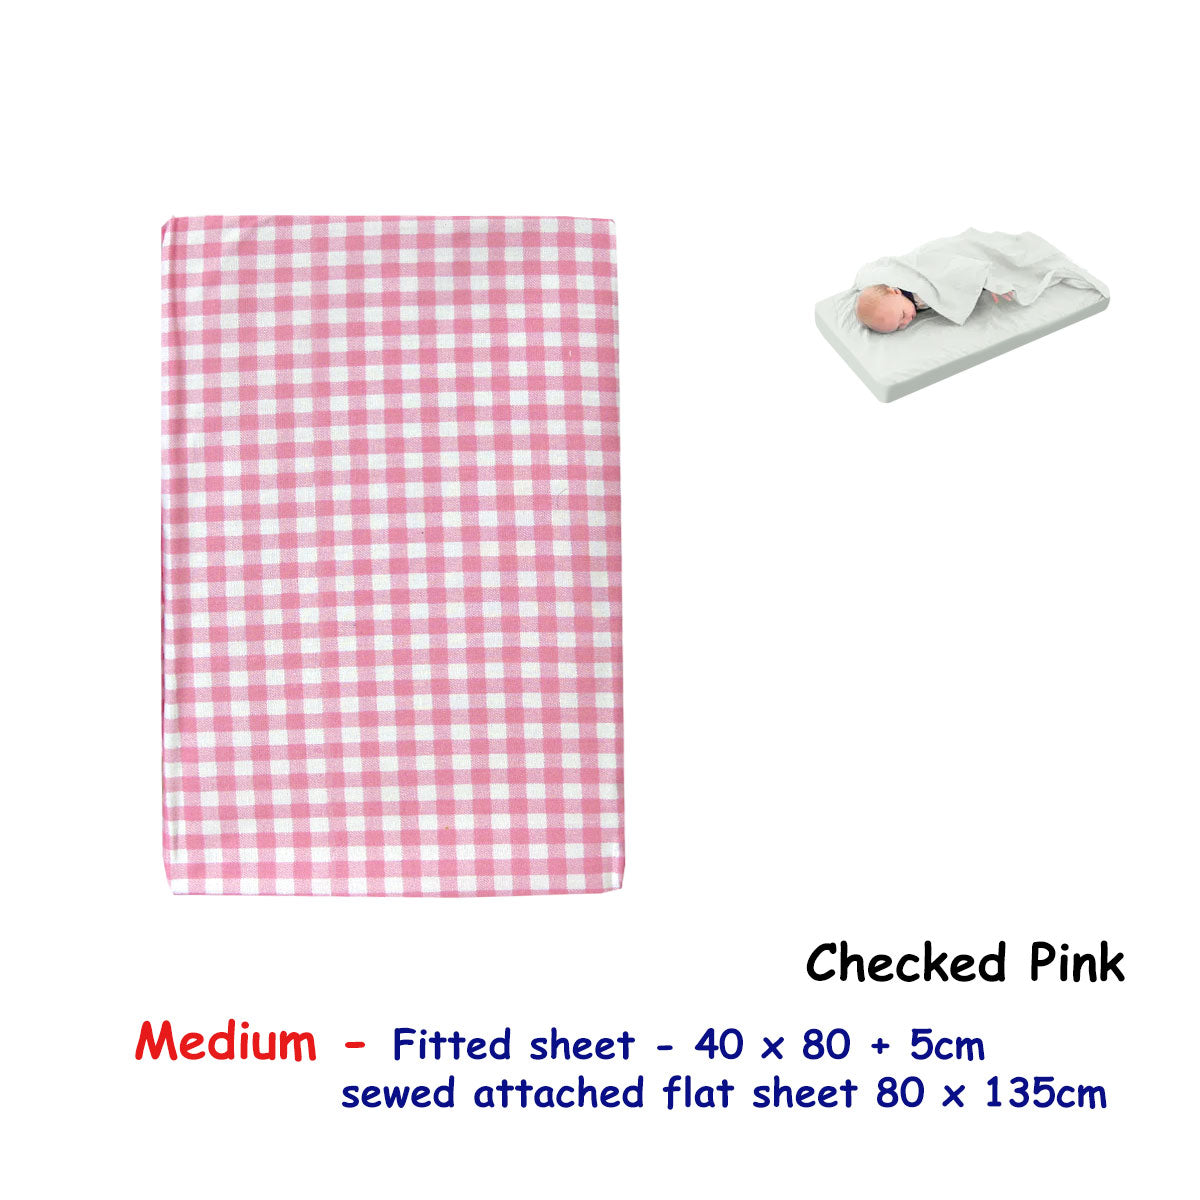 Checked Pink Bassinet Fitted Sheet with a Flat Sheet Sewed Attached